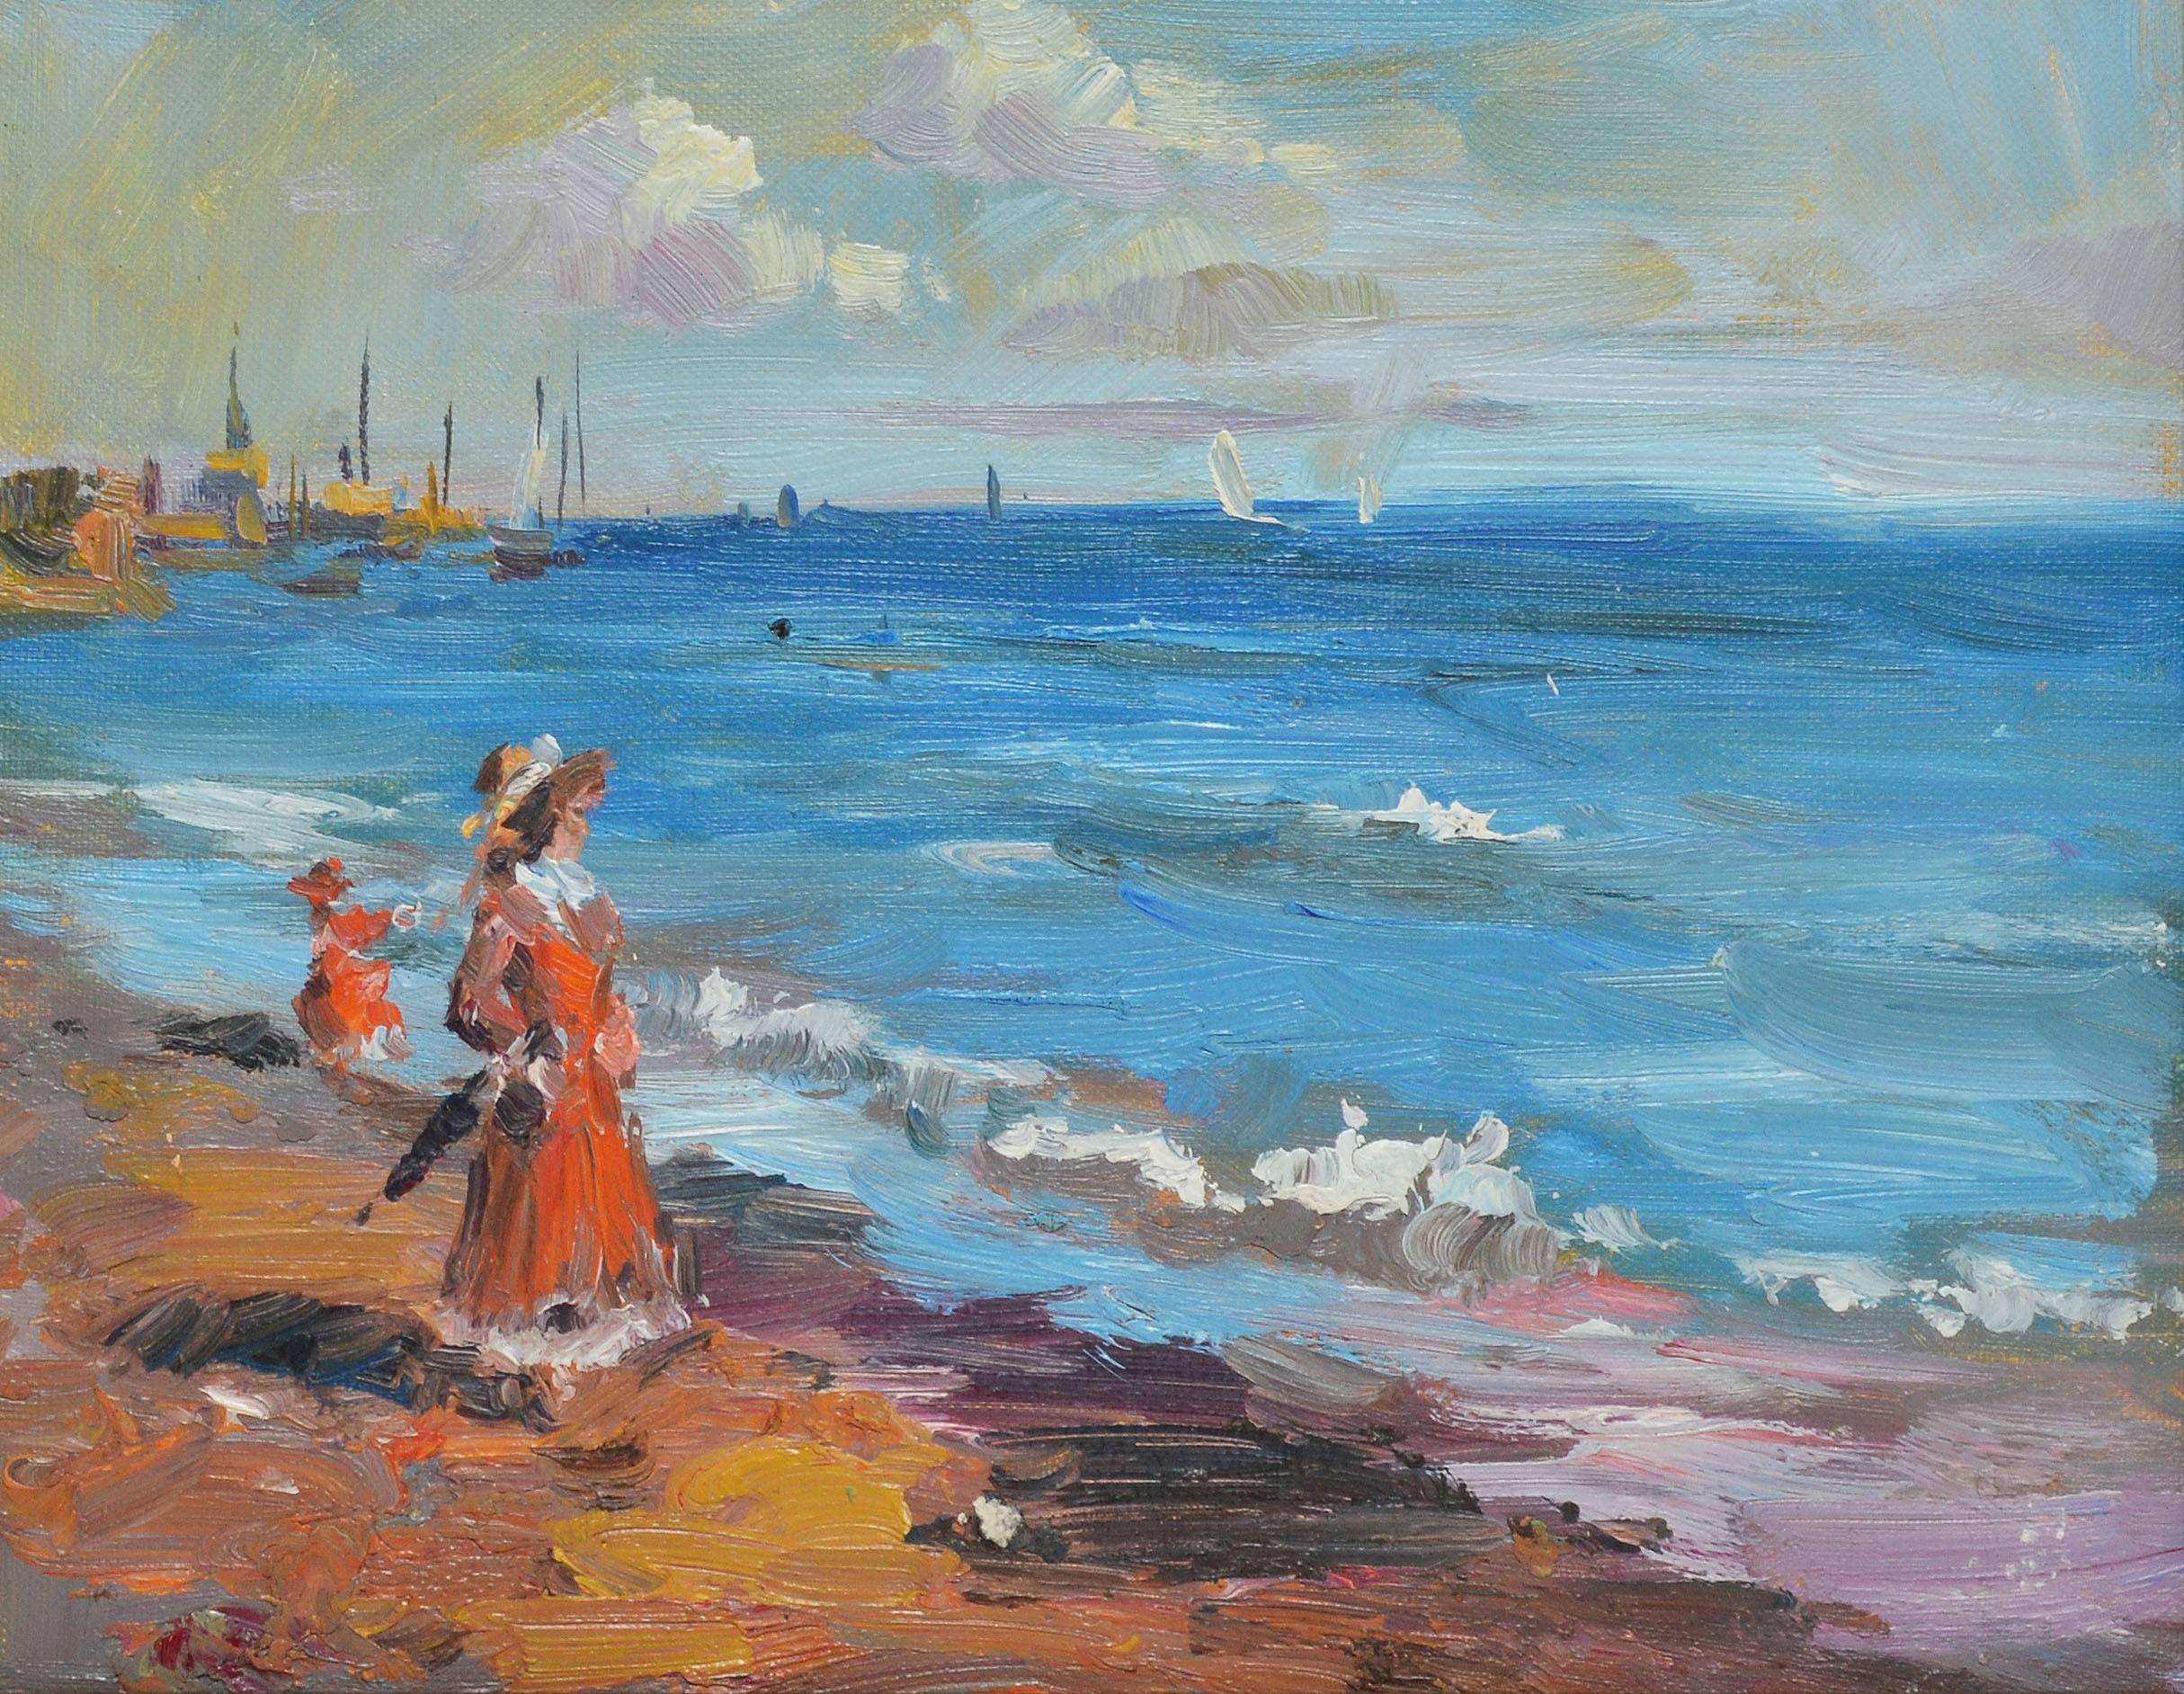 Summer Day at the Beach - Impressionist Painting by Unknown